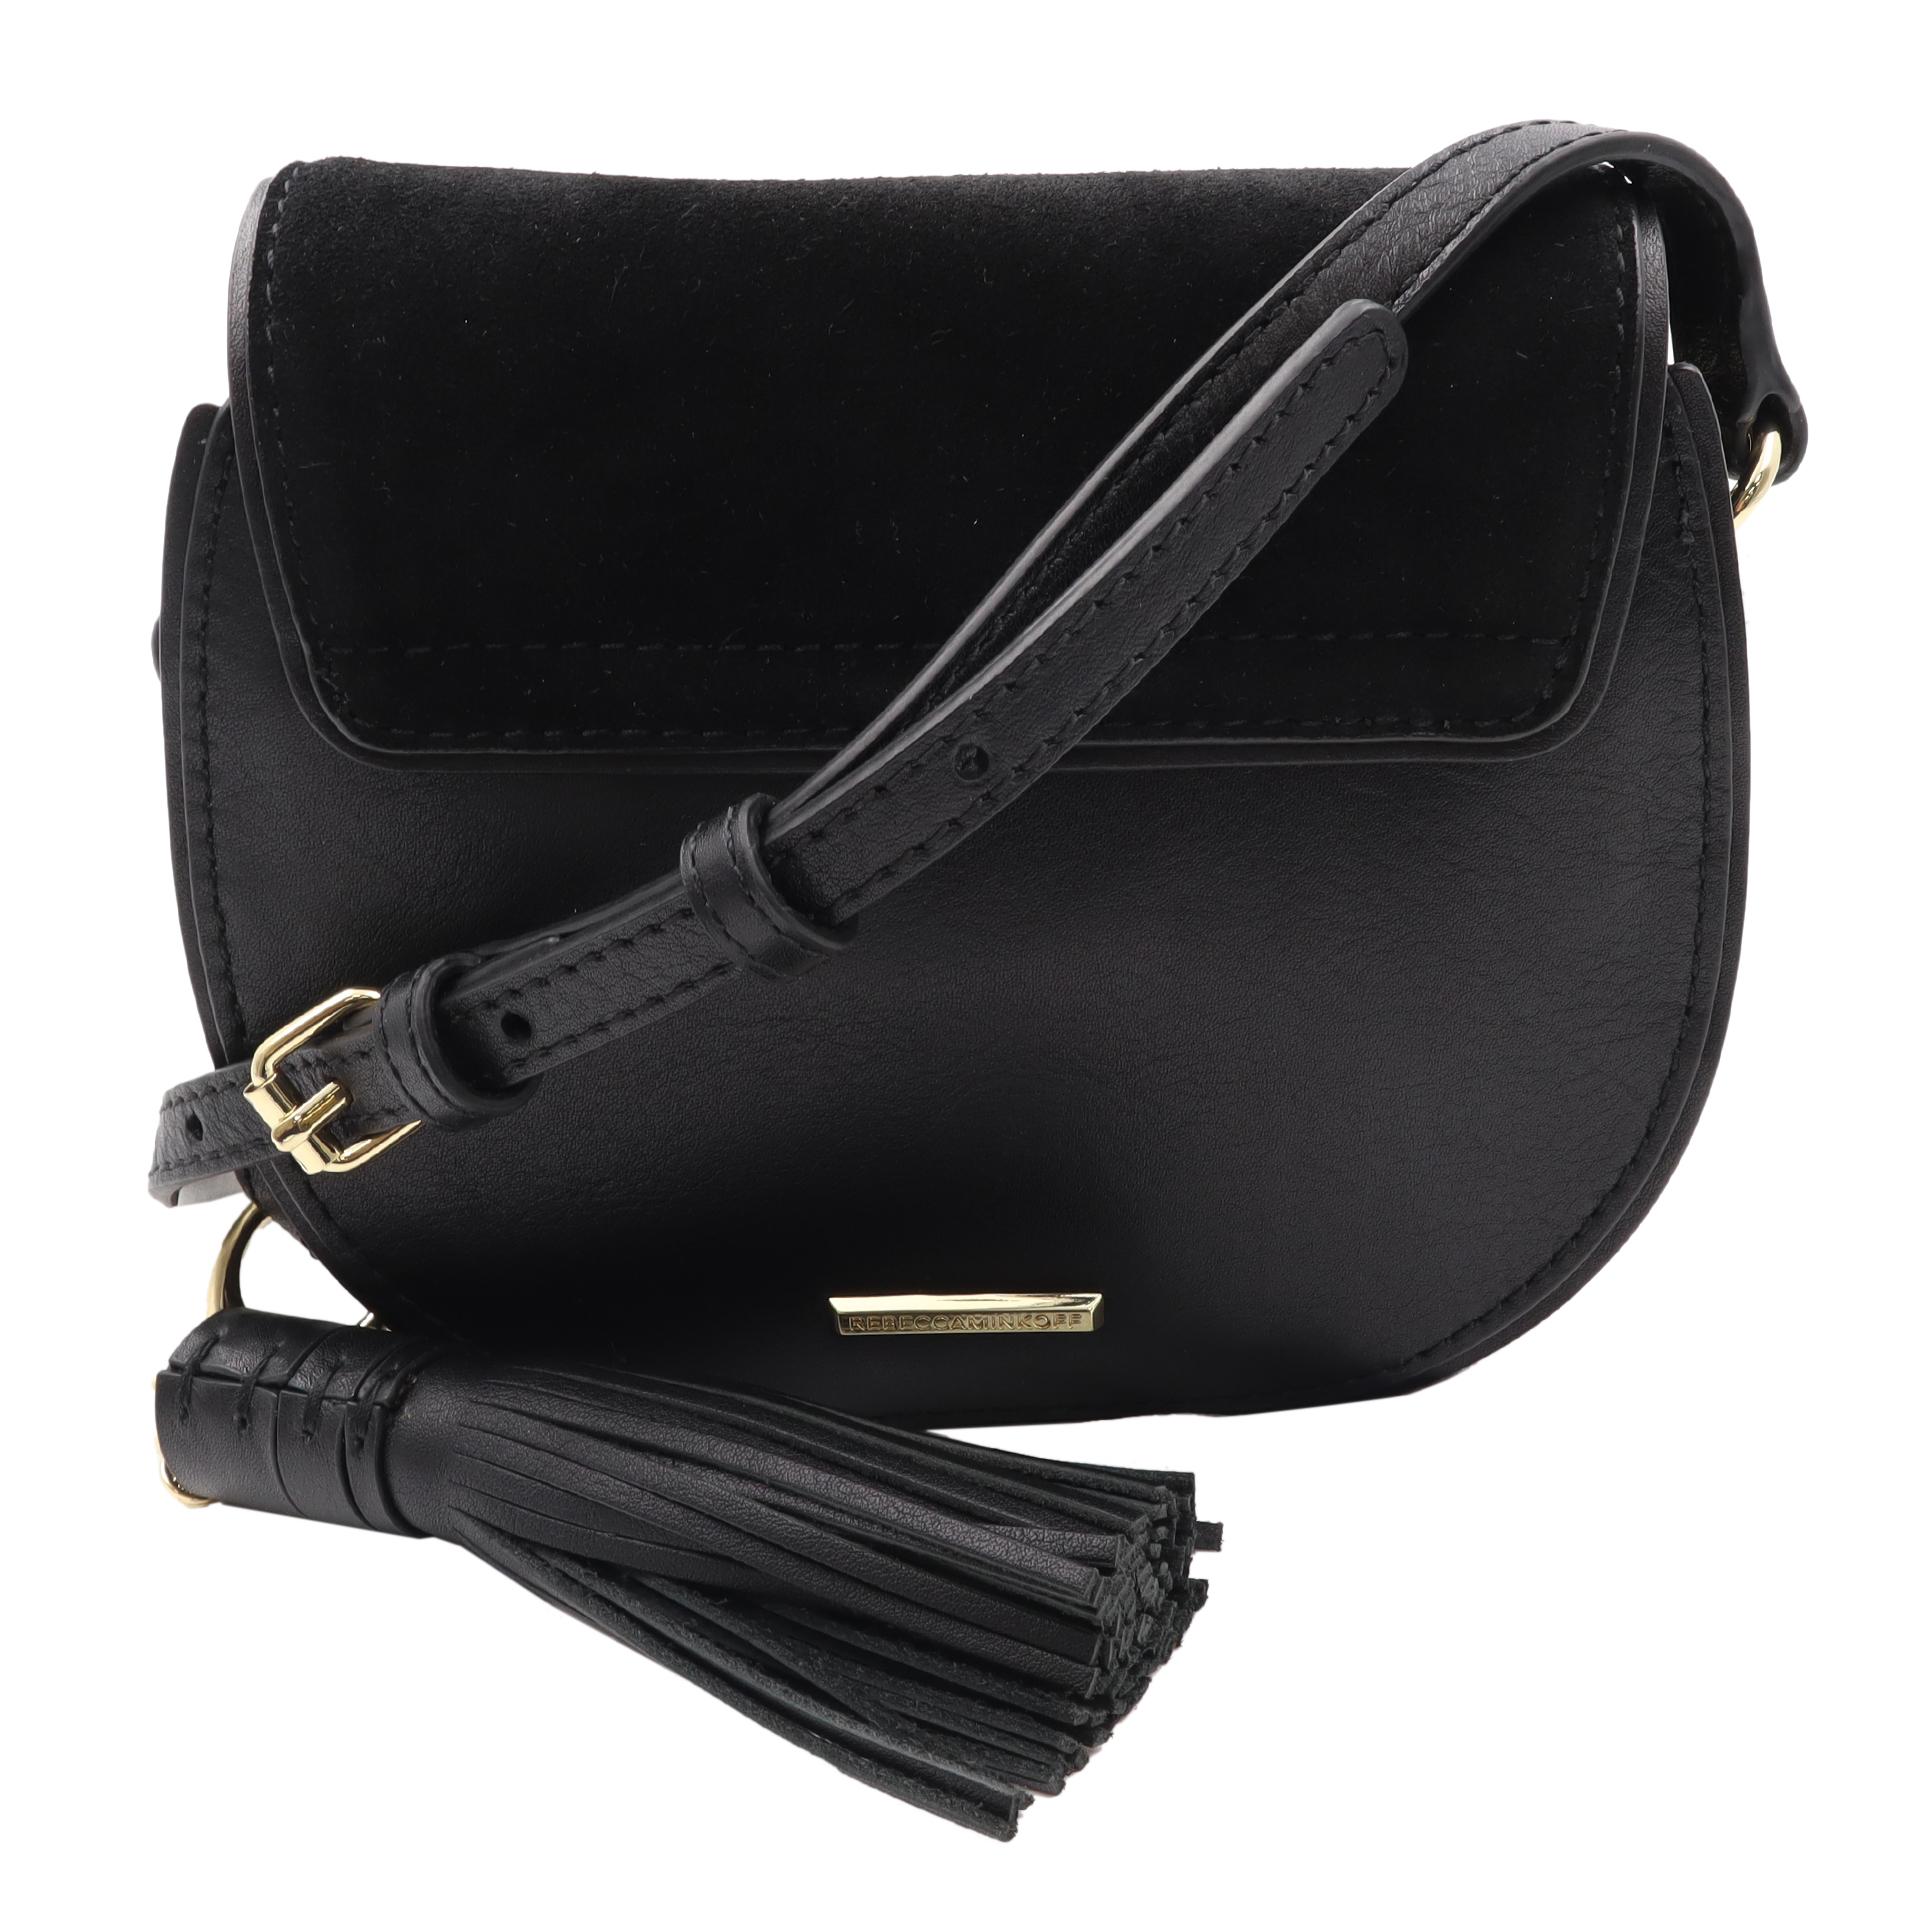 A Rebecca Minkoff crossbody bag crafted in black leather with a suede trim and custom light gold-tone hardware and a fully lined interior. This Rebecca Minkoff crossbody features a flap with a snap closure with a main zip pocket, and an exterior